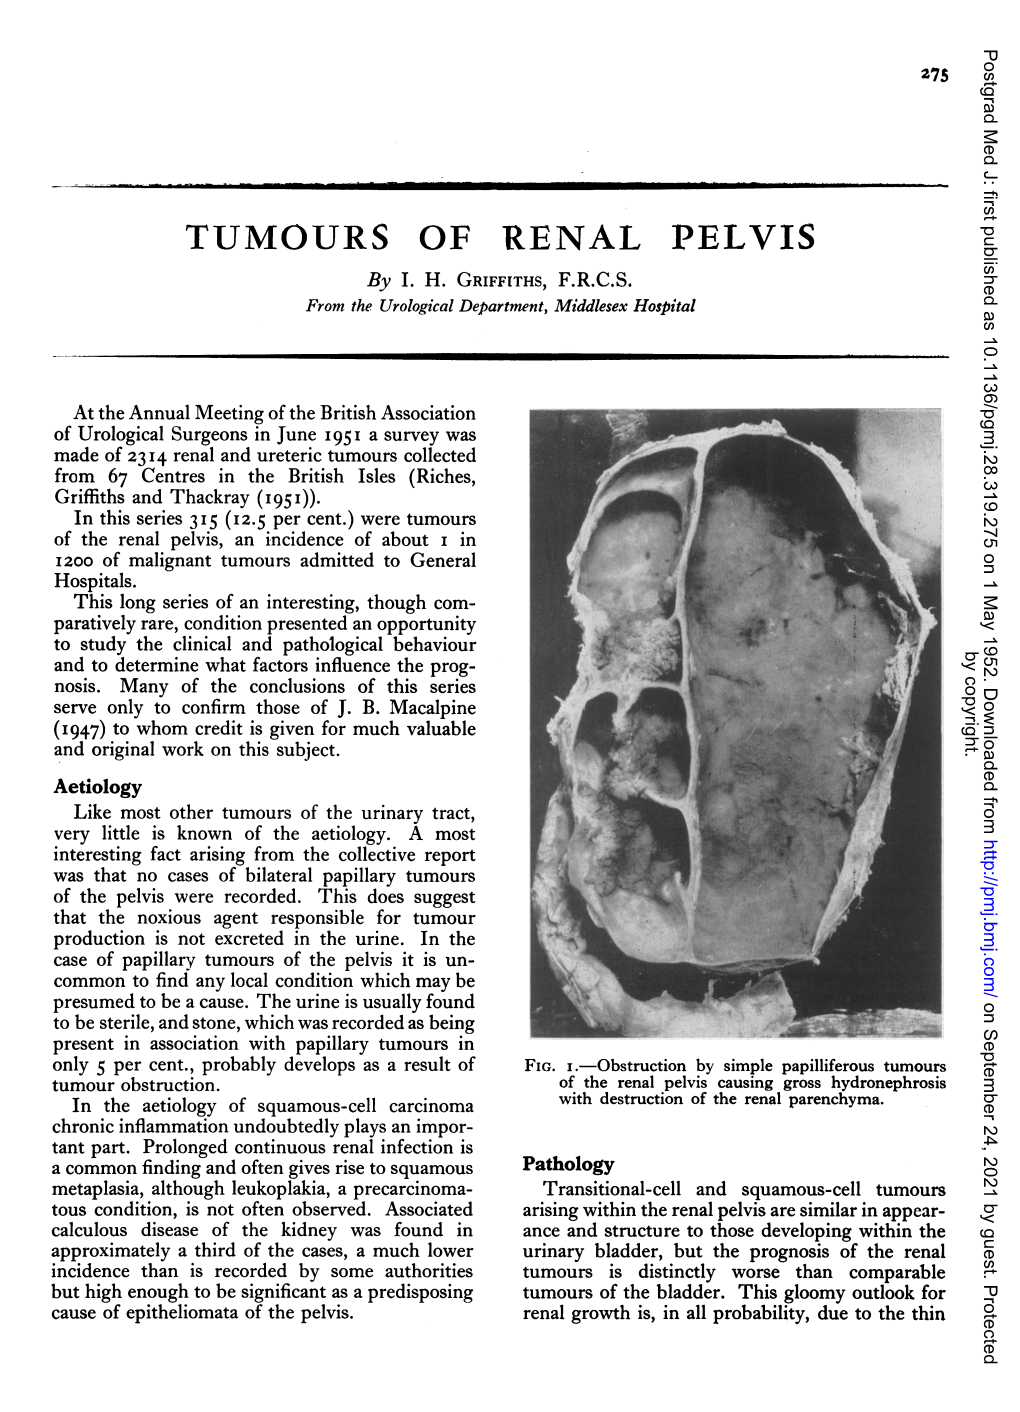 TUMOURS of RENAL PELVIS by I